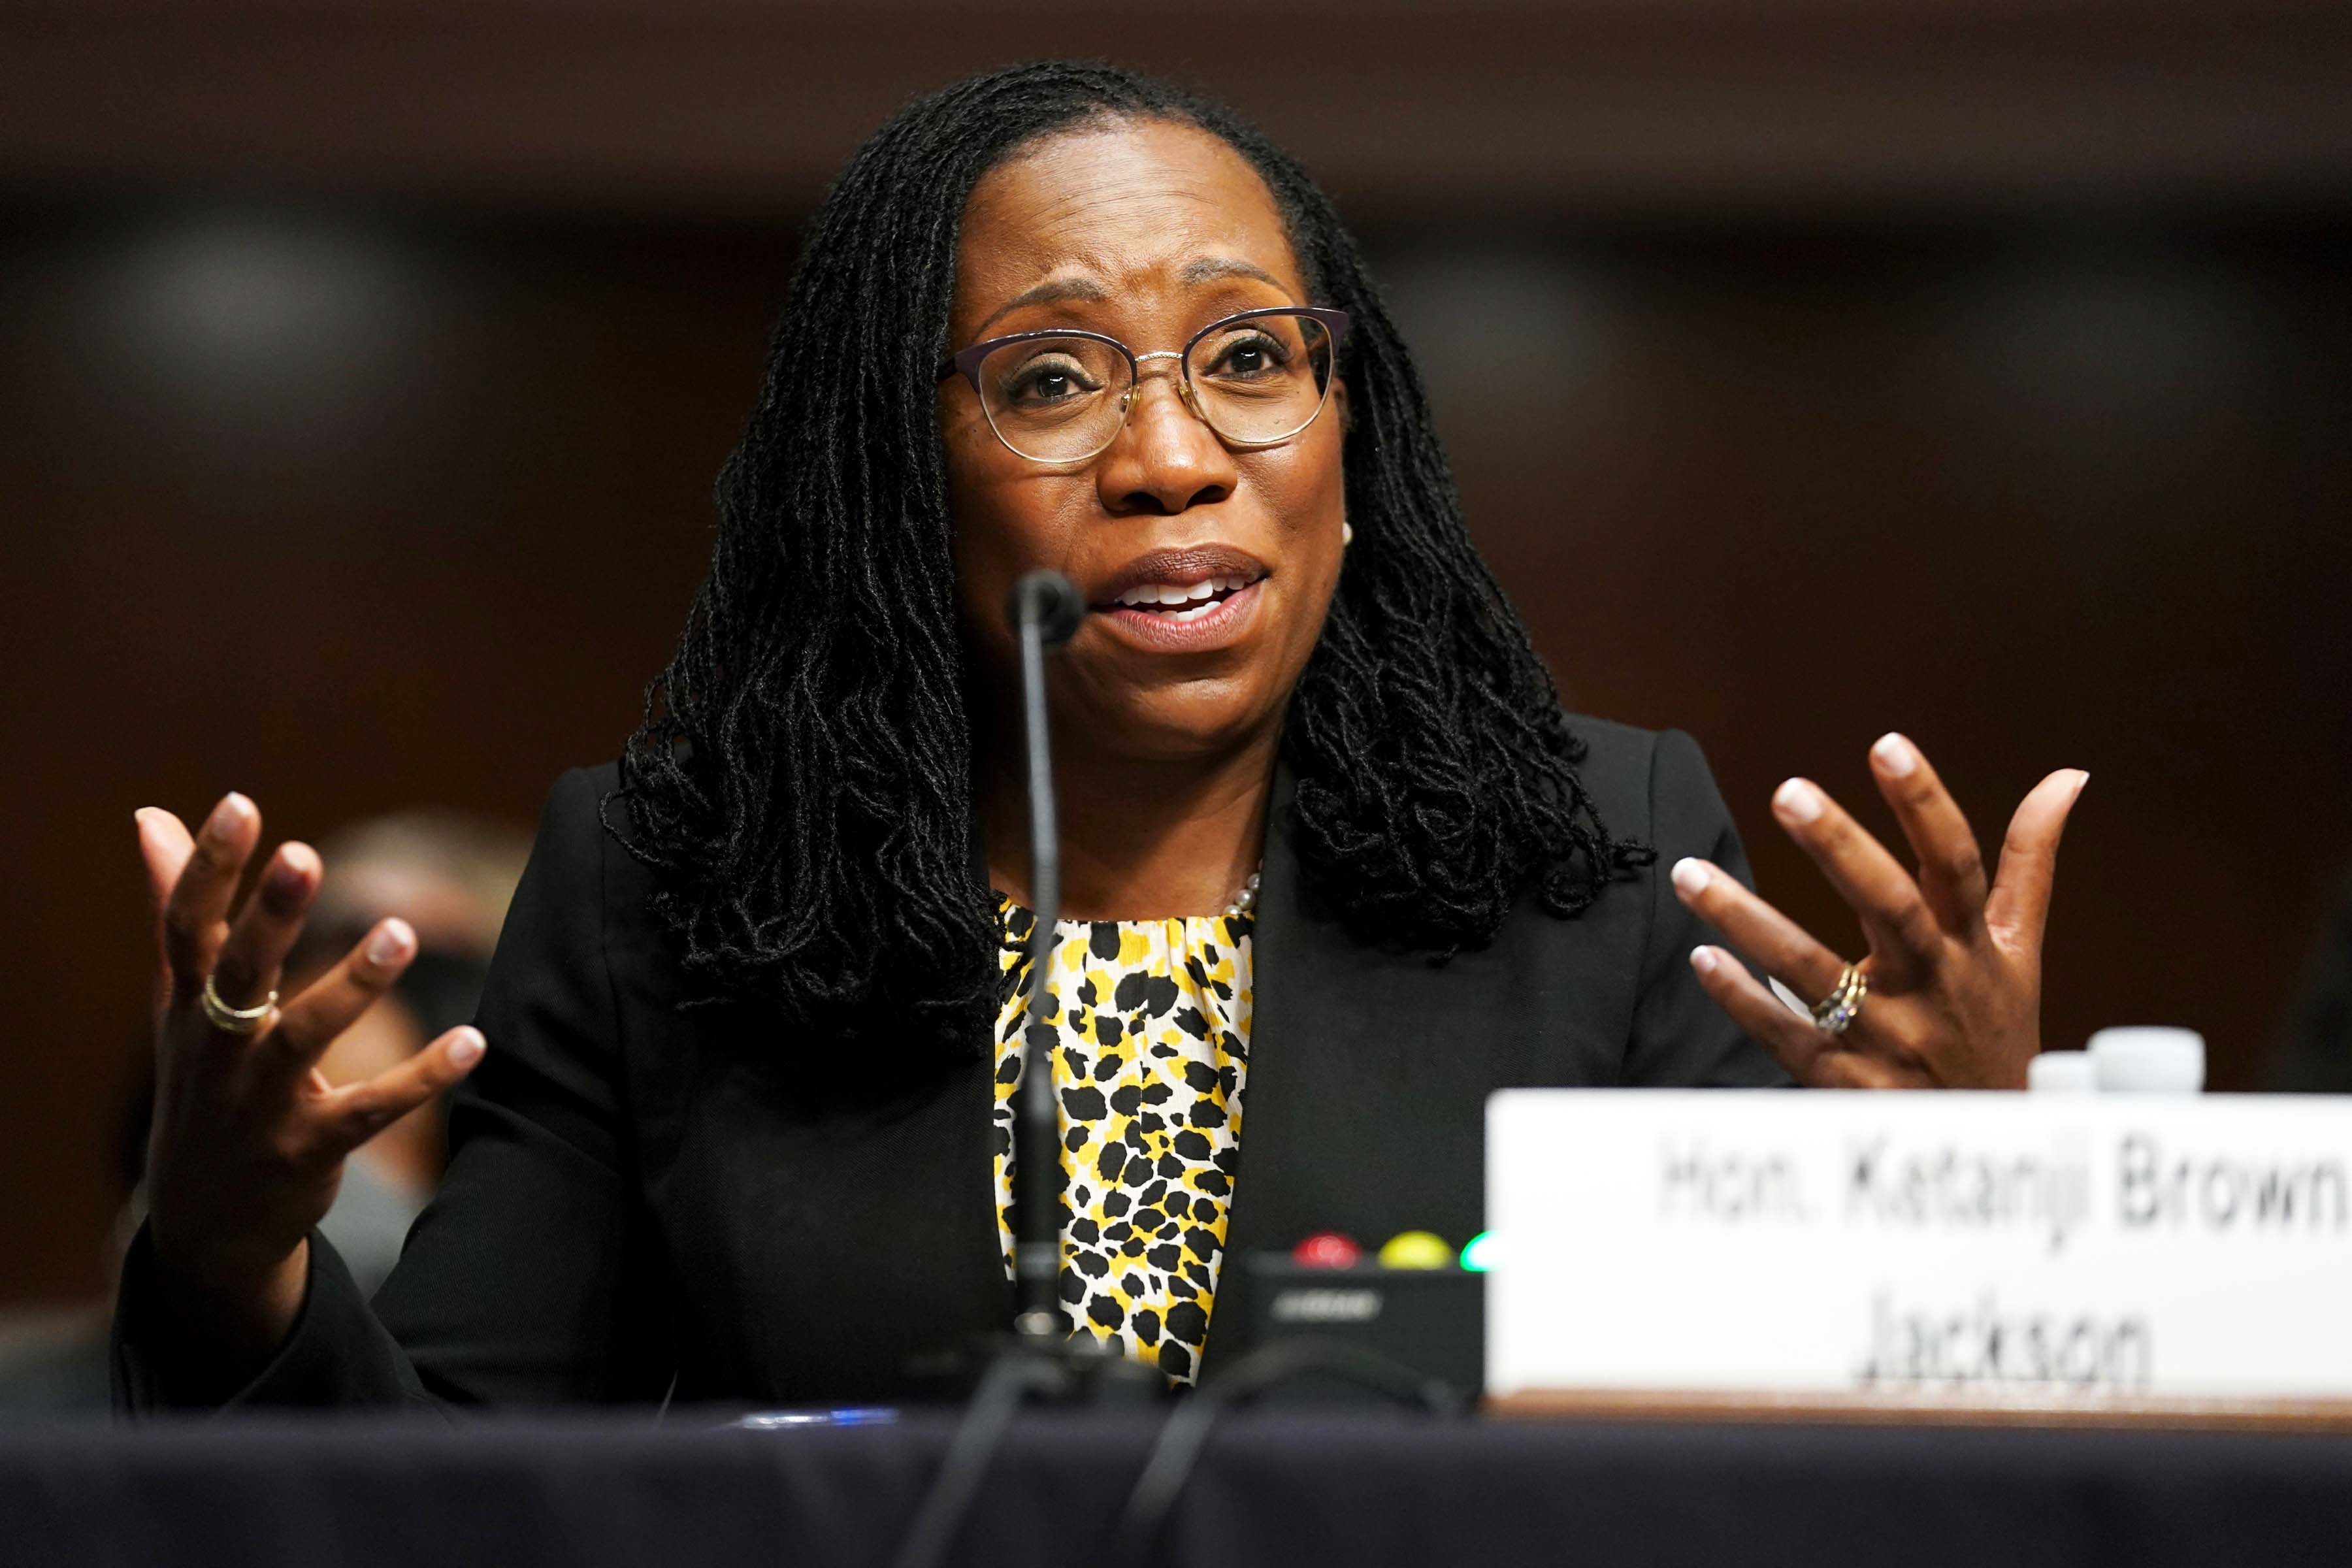 Ketanji Brown Jackson, nominated to be a U.S. Circuit Judge for the District of Columbia Circuit attends the Senate Judiciary Committee confirmation hearing in the Dirksen Senate Office Building.